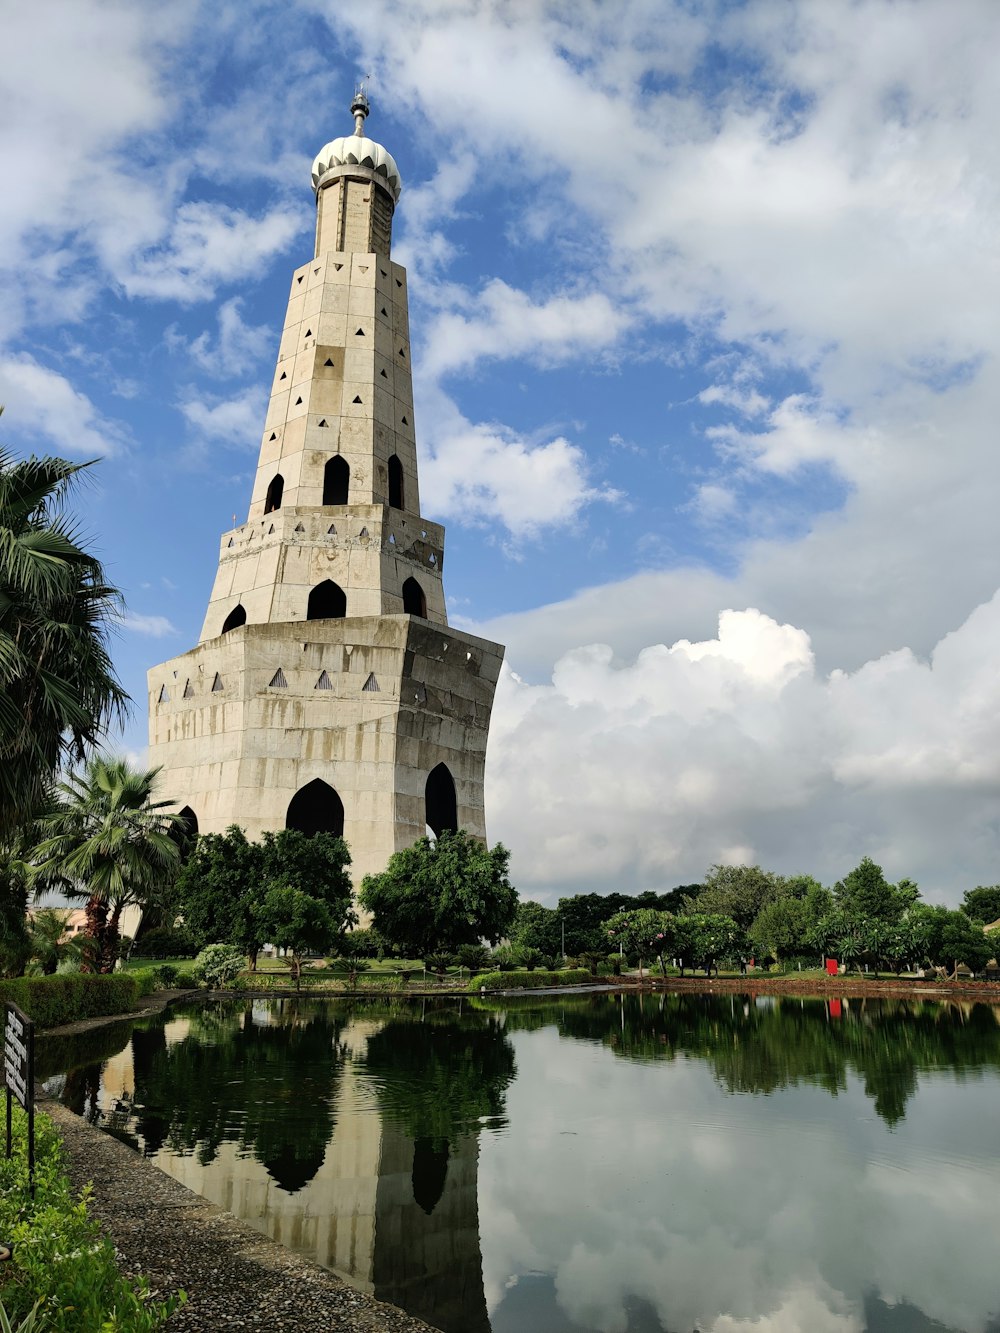 a tall tower with a clock on top next to a body of water